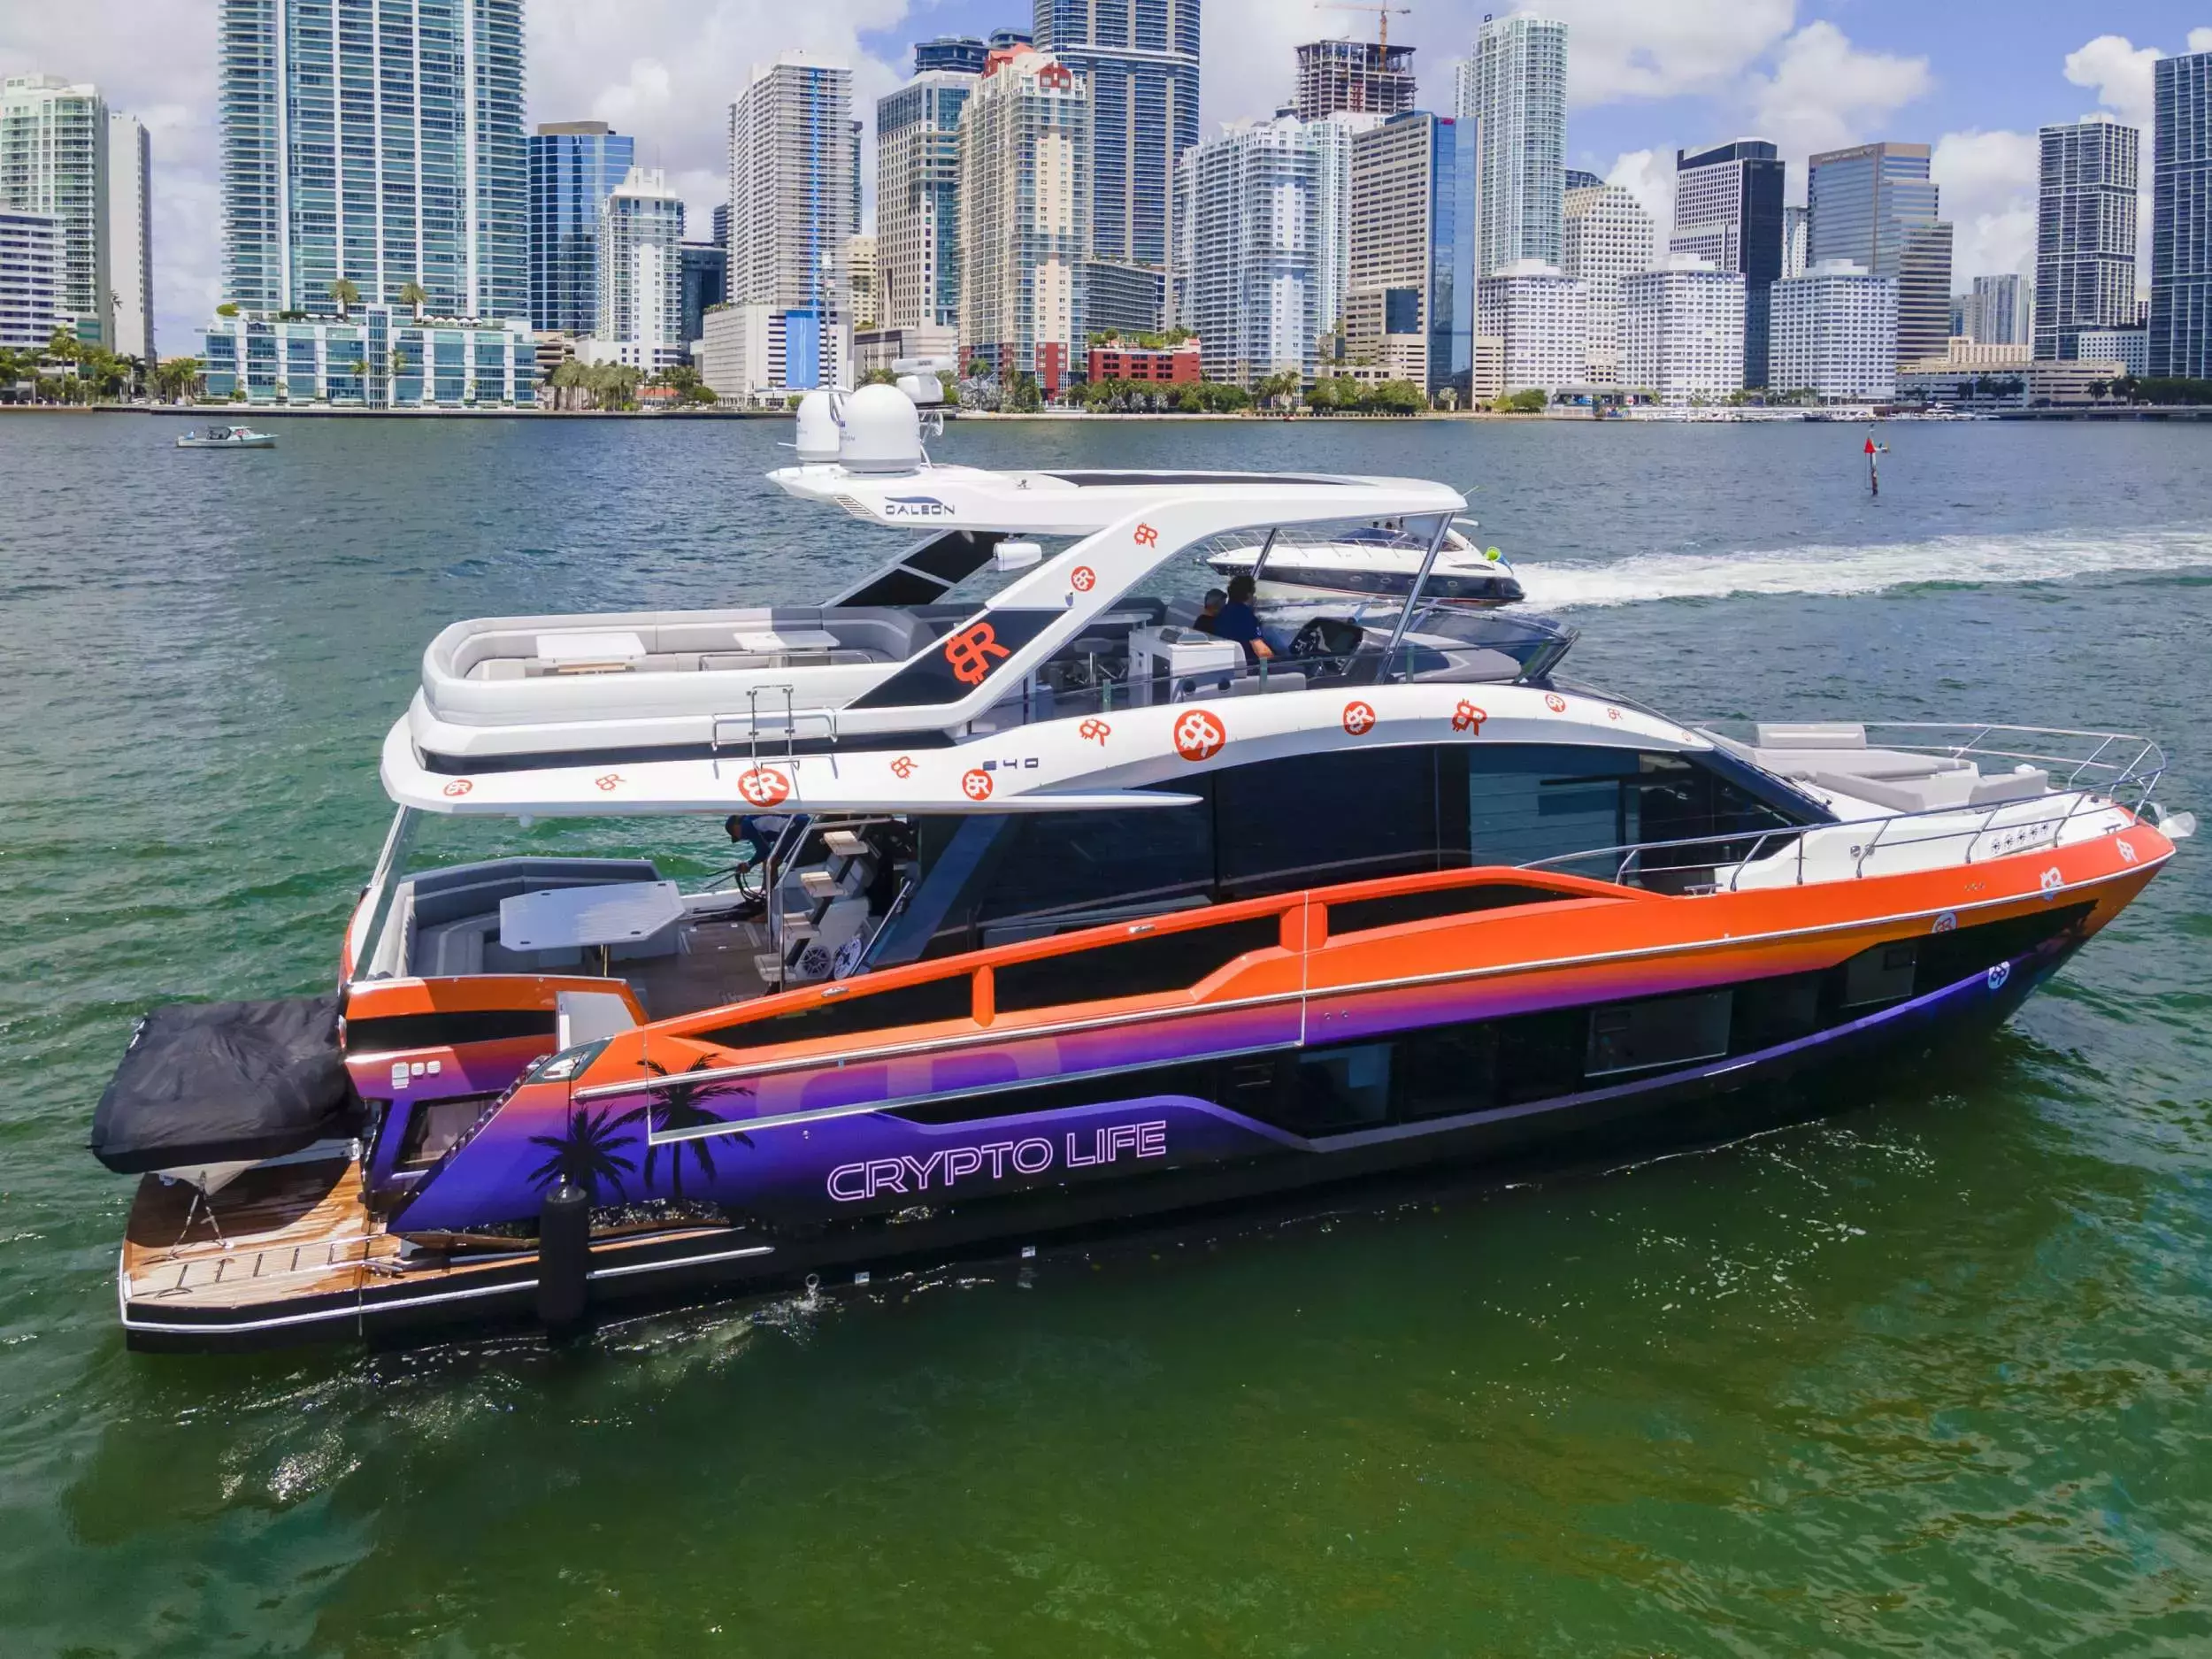 Crypto Life by Galeon - Top rates for a Charter of a private Motor Yacht in Florida USA